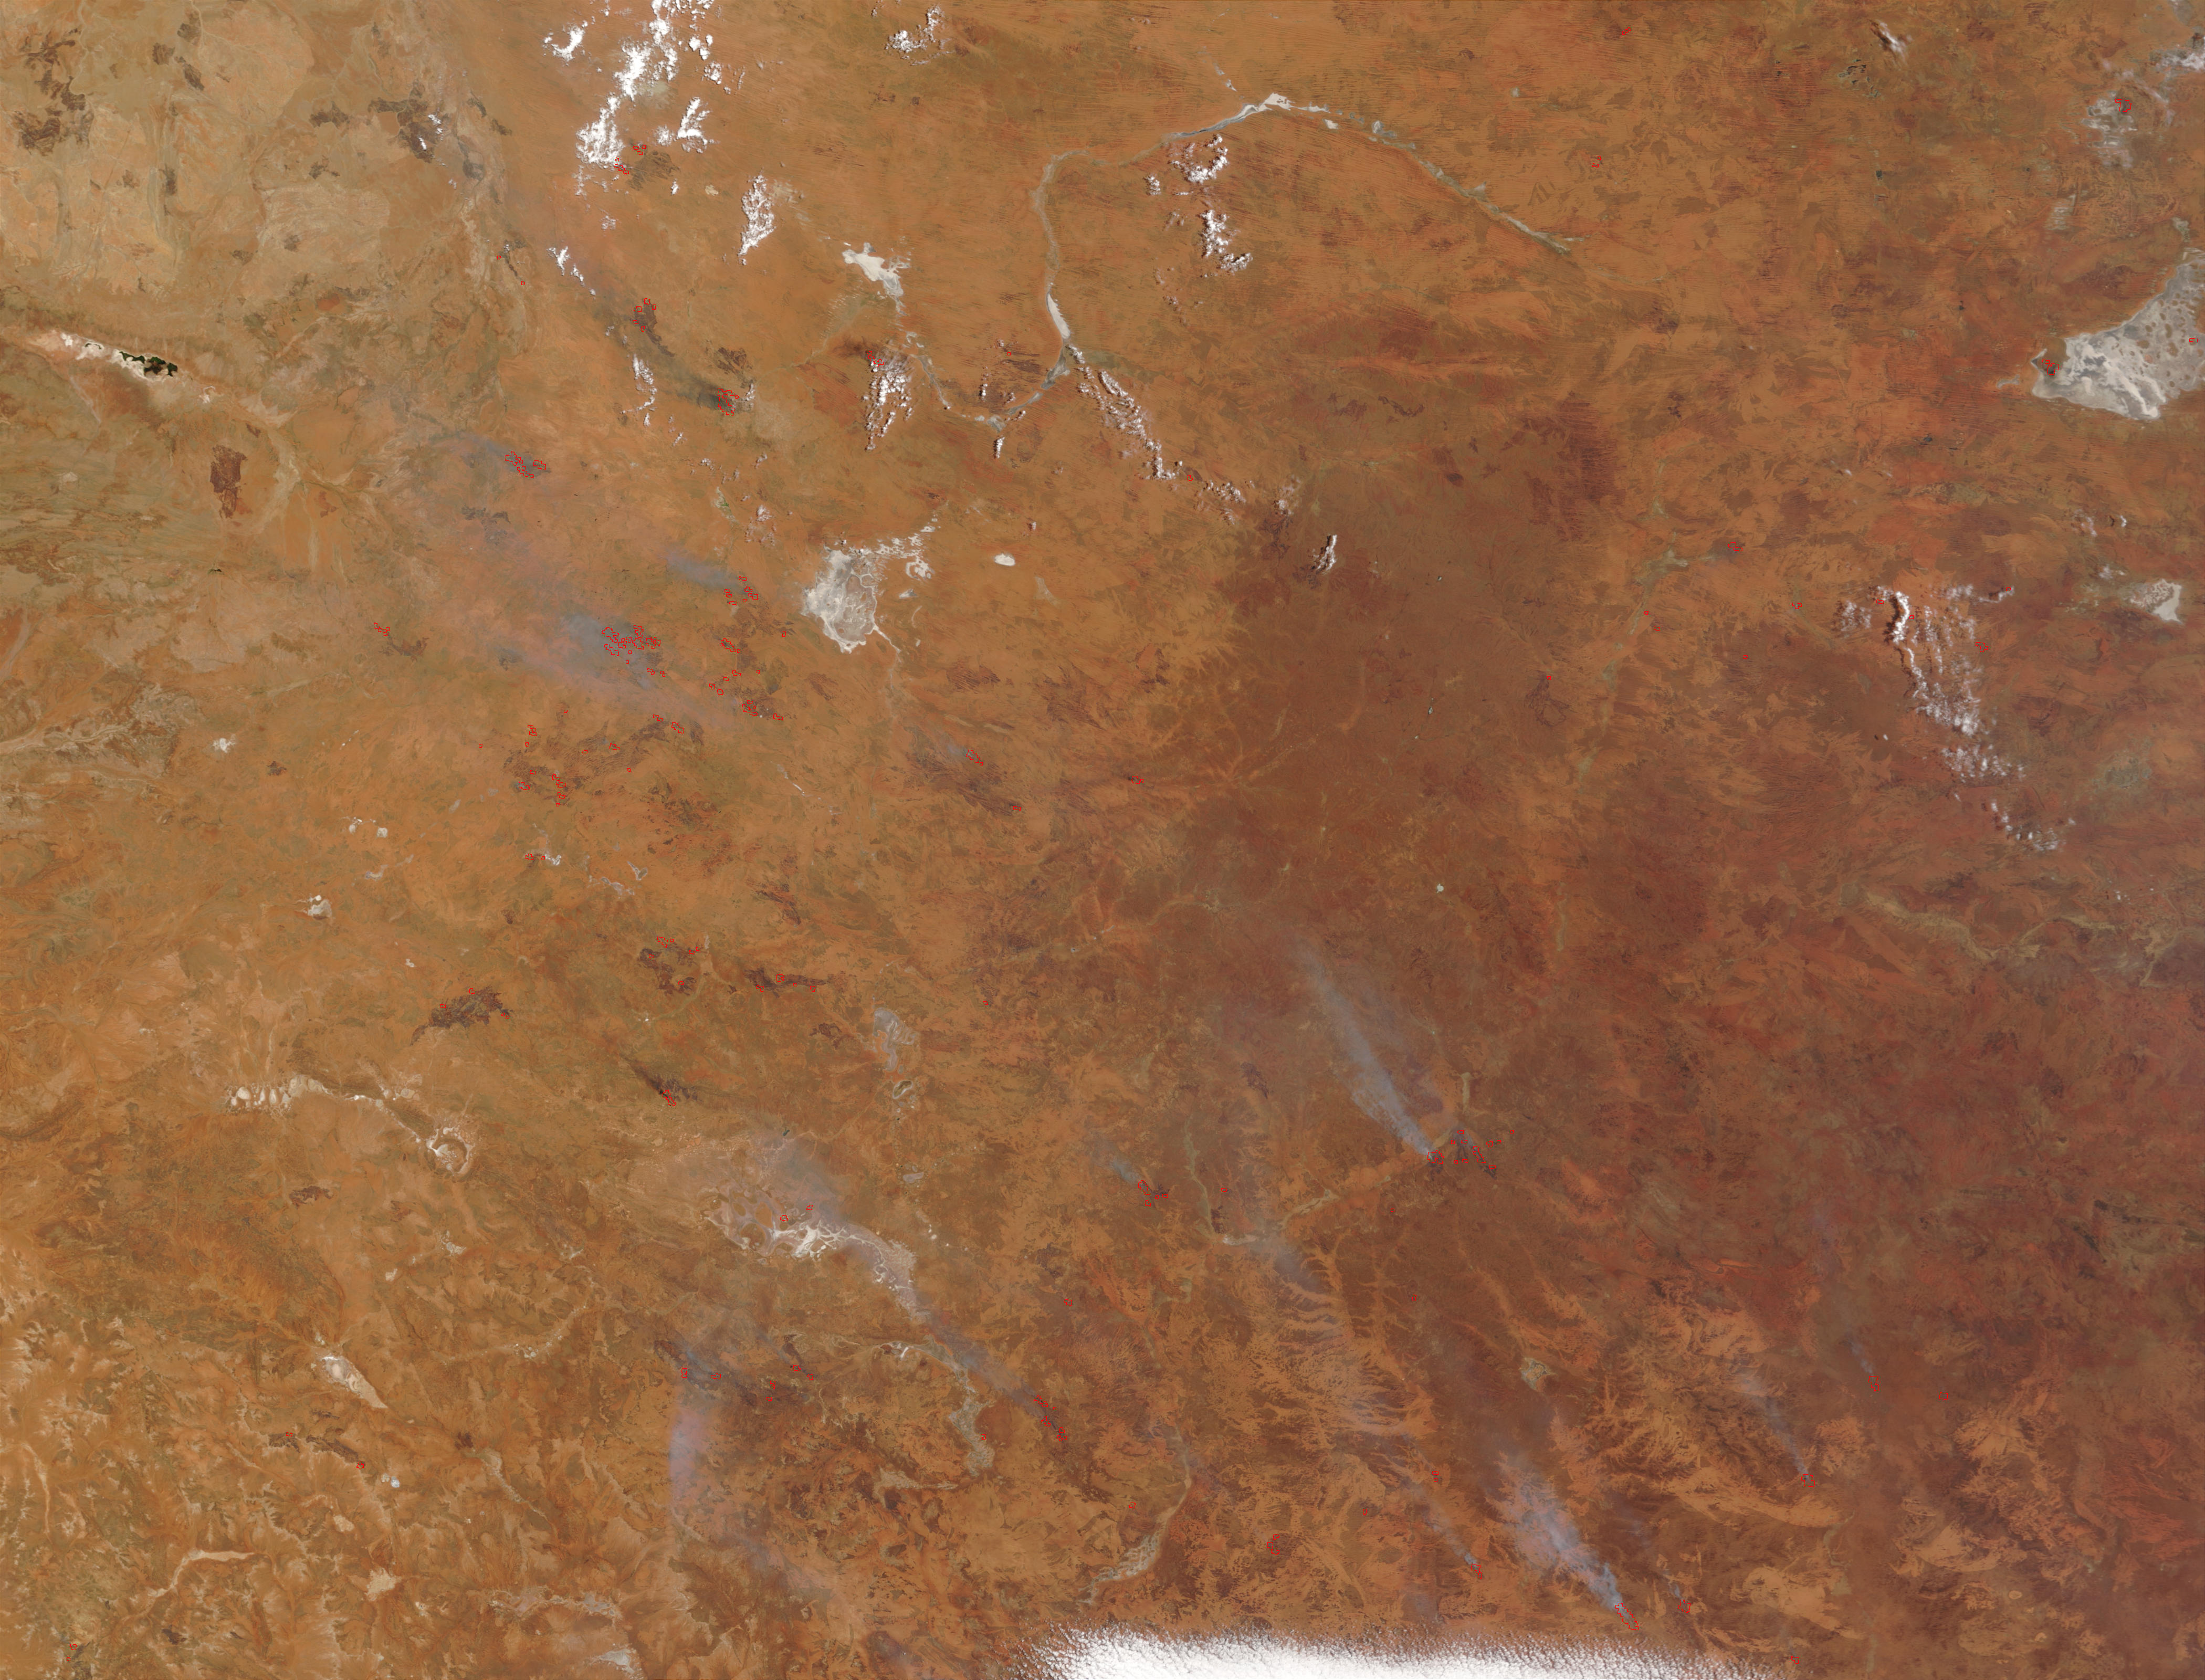 Fires in Central Western Australia - related image preview